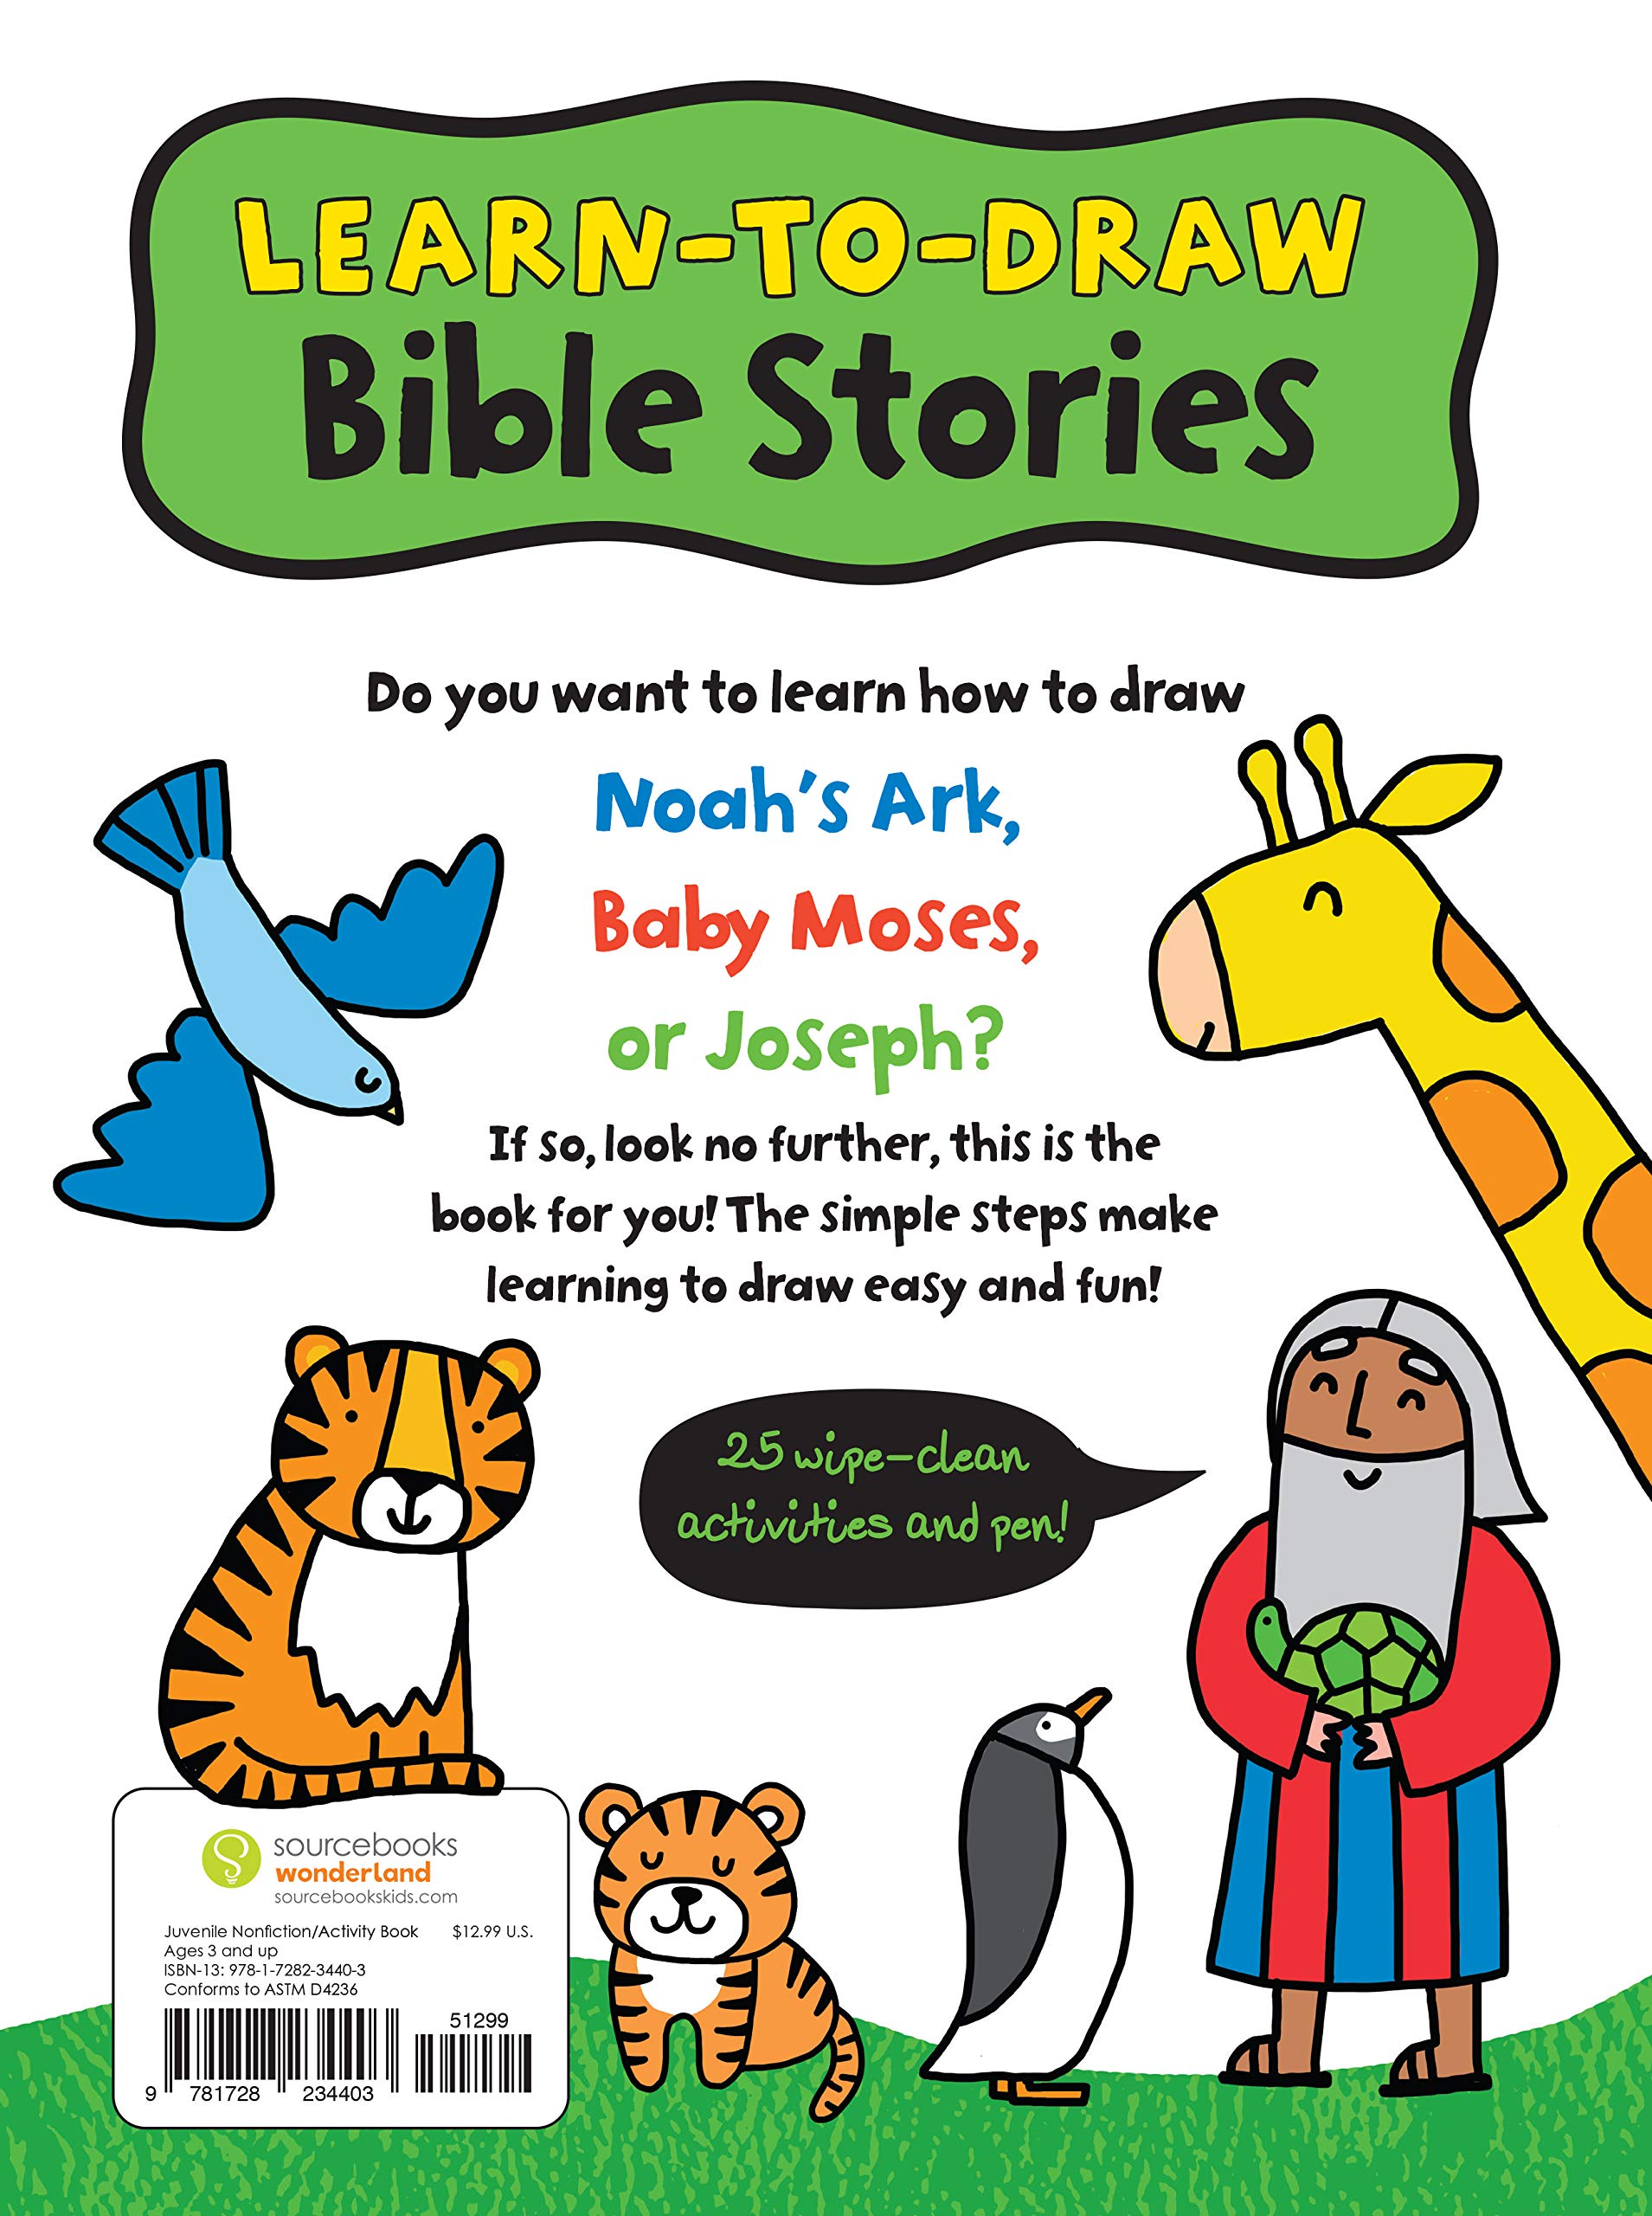 My First Learn-To-Draw: Bible Stories